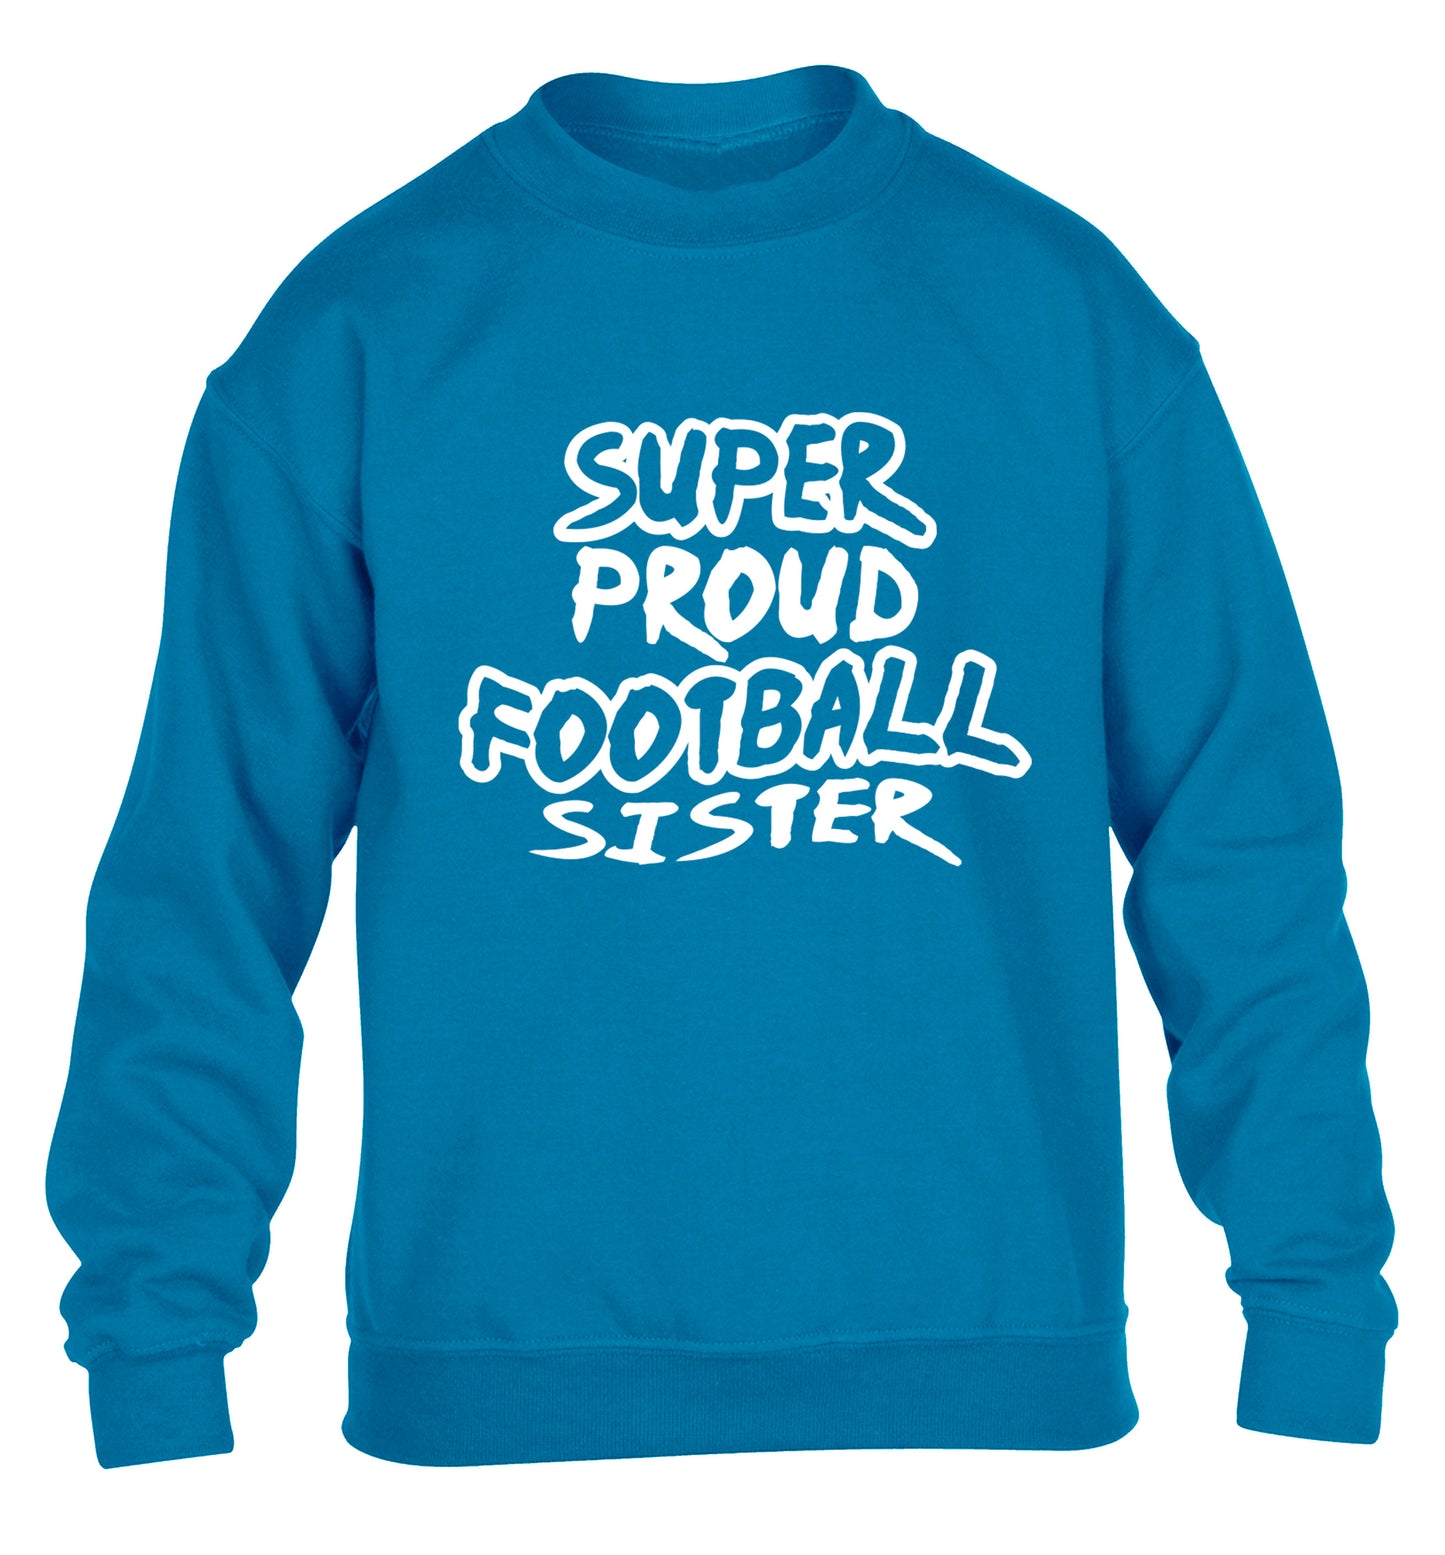 Super proud football sister children's blue sweater 12-14 Years